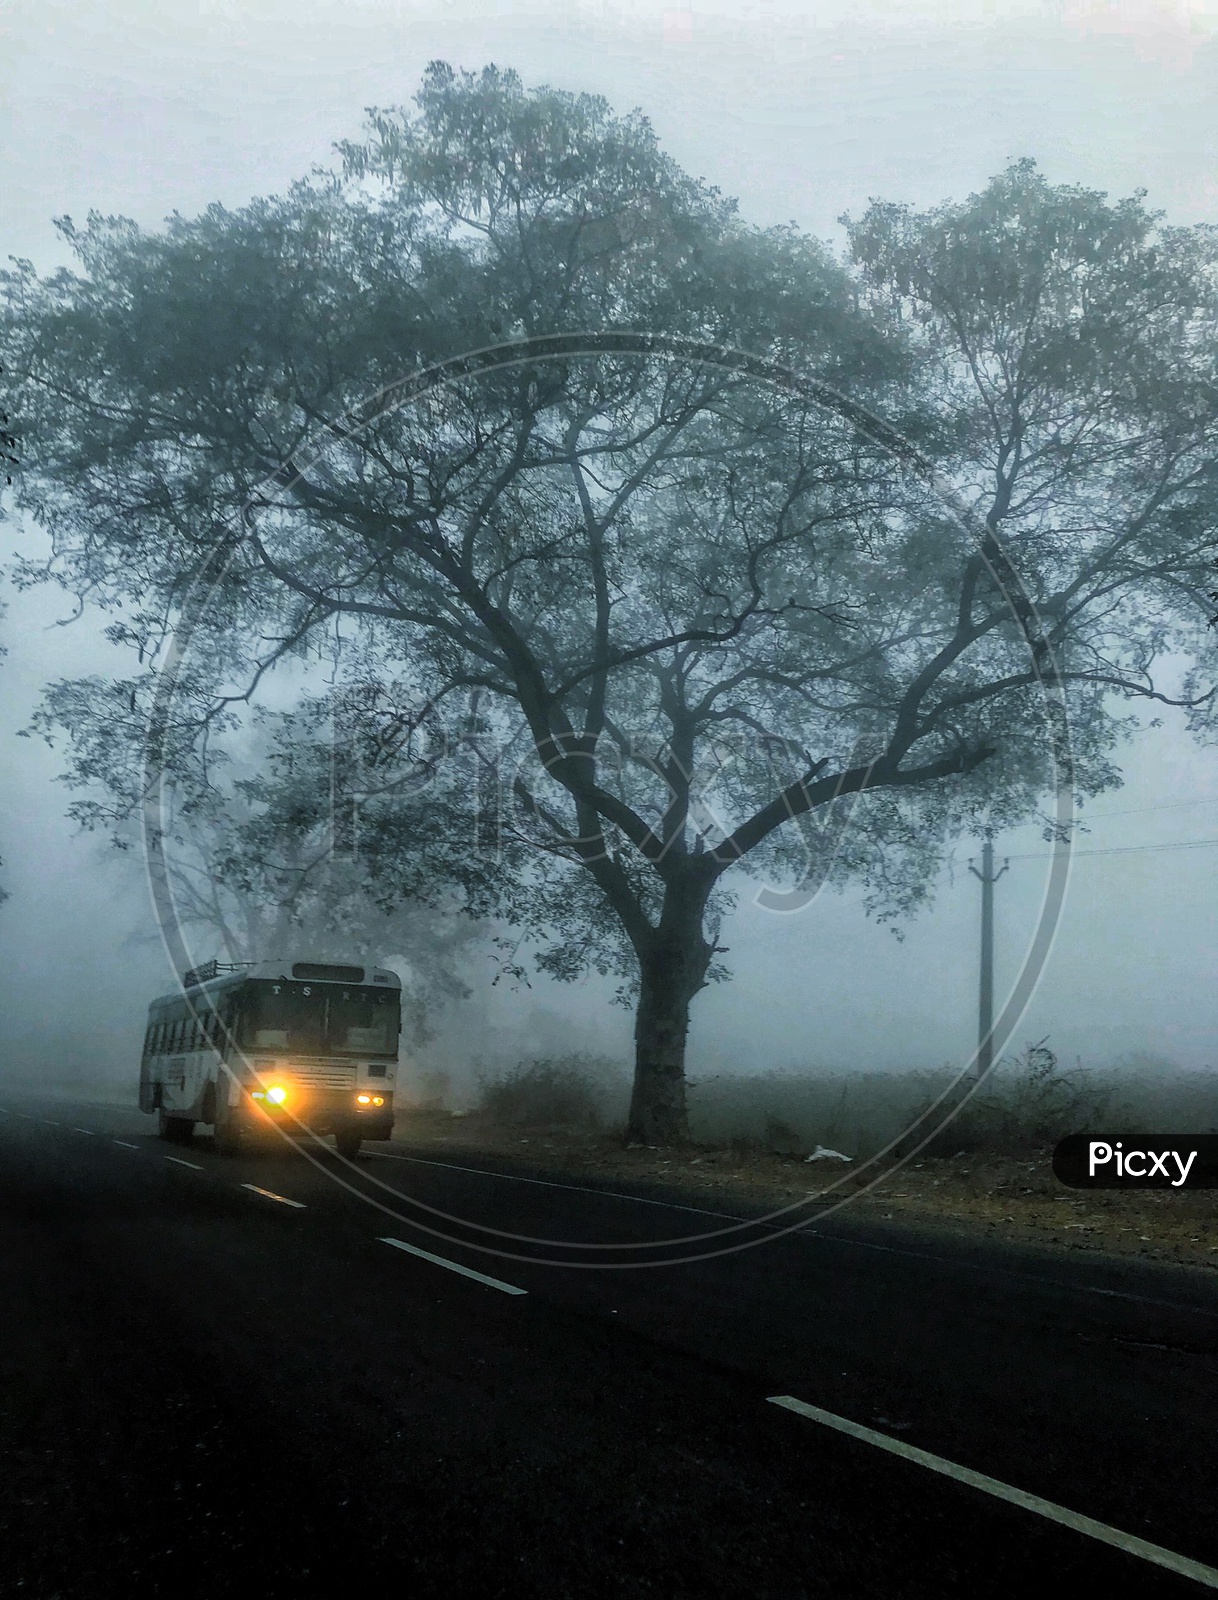 A Bus on the Inter State Roads in Foggy morning